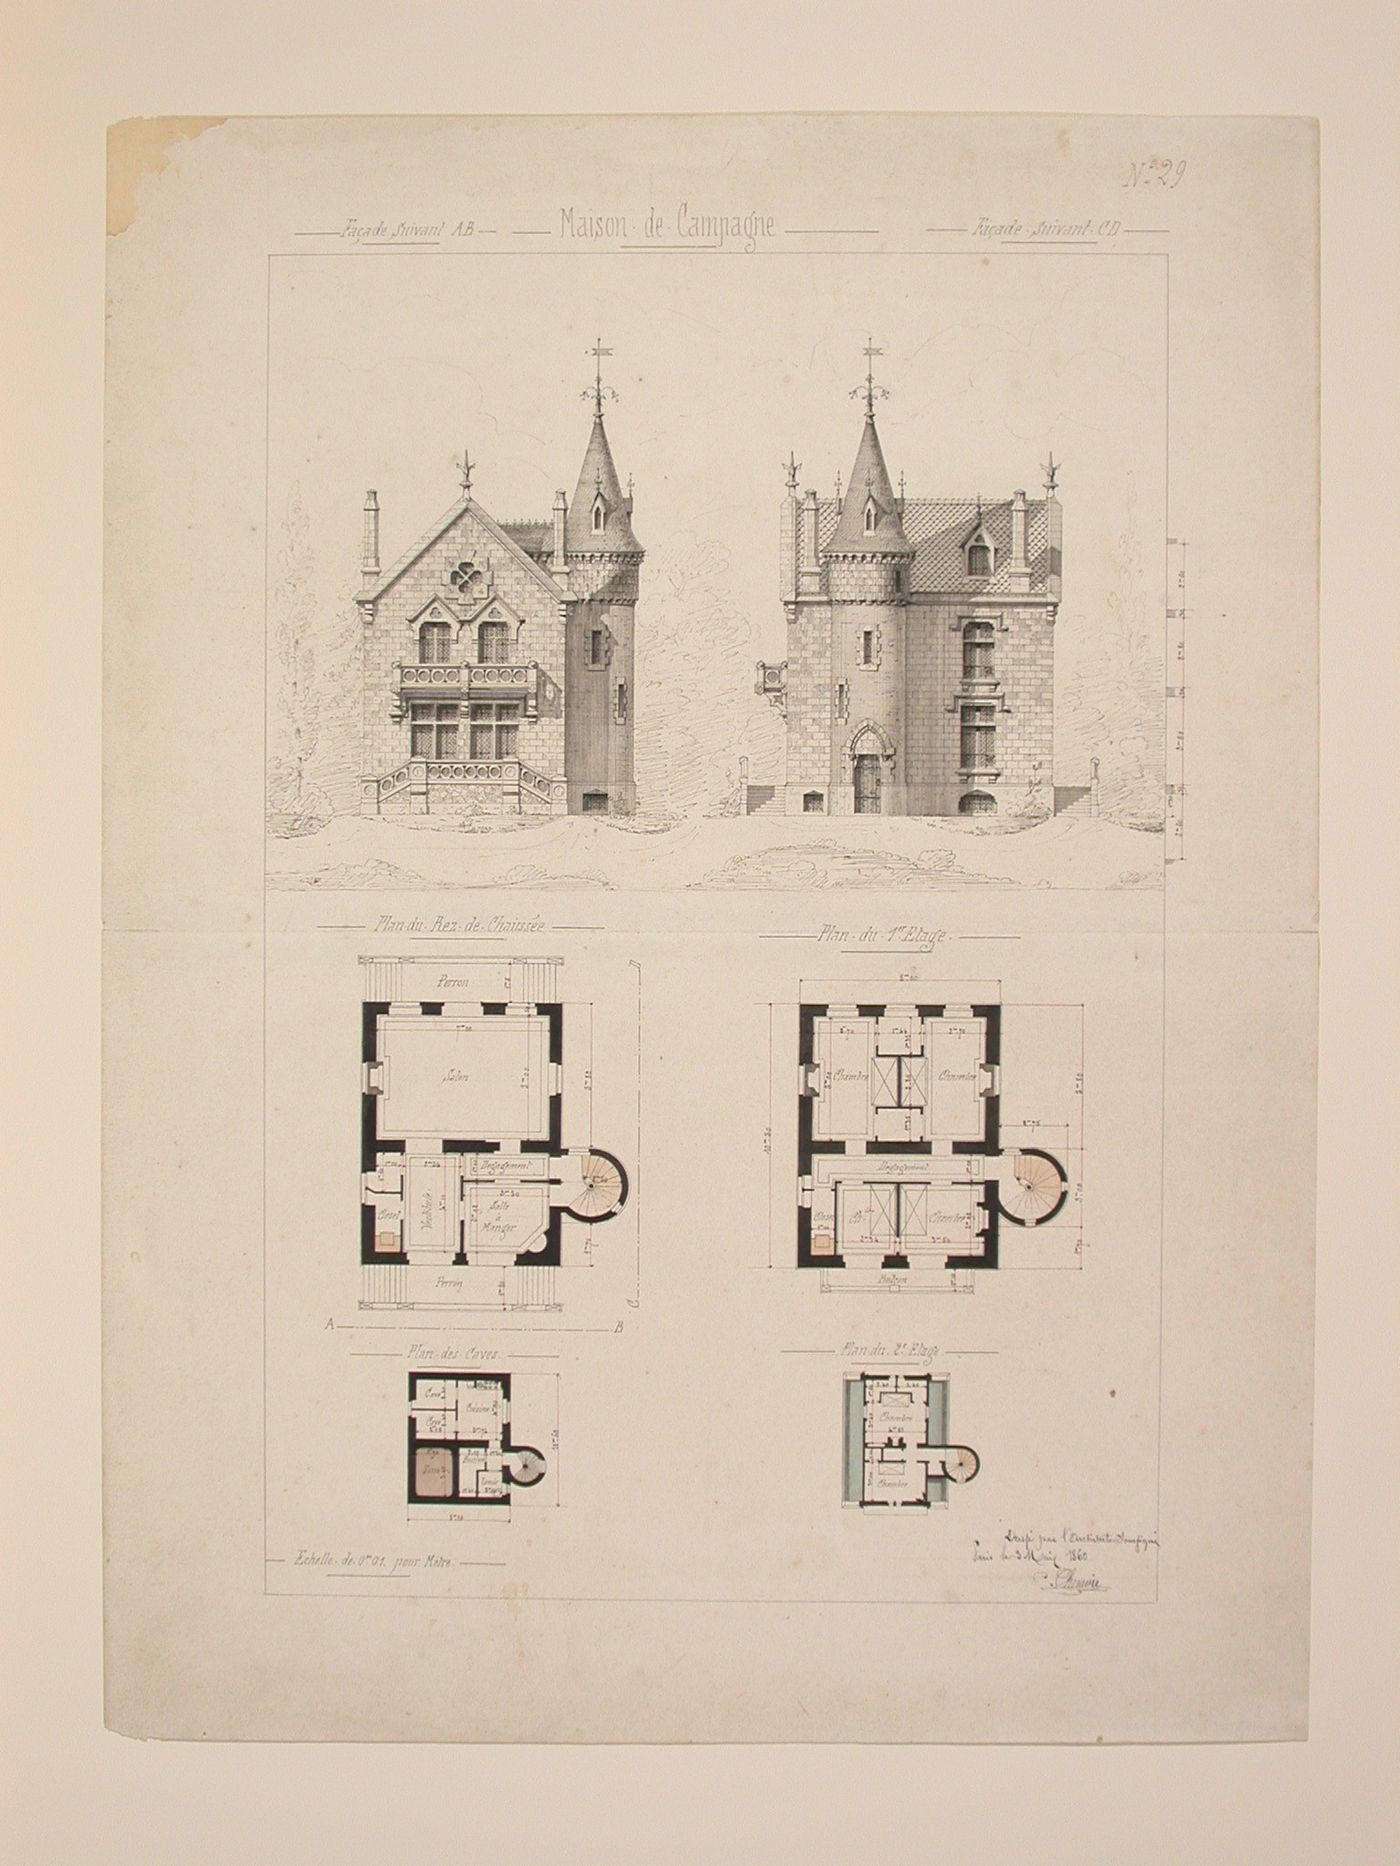 Rendered elevations and plans for a Gothic Revival country house